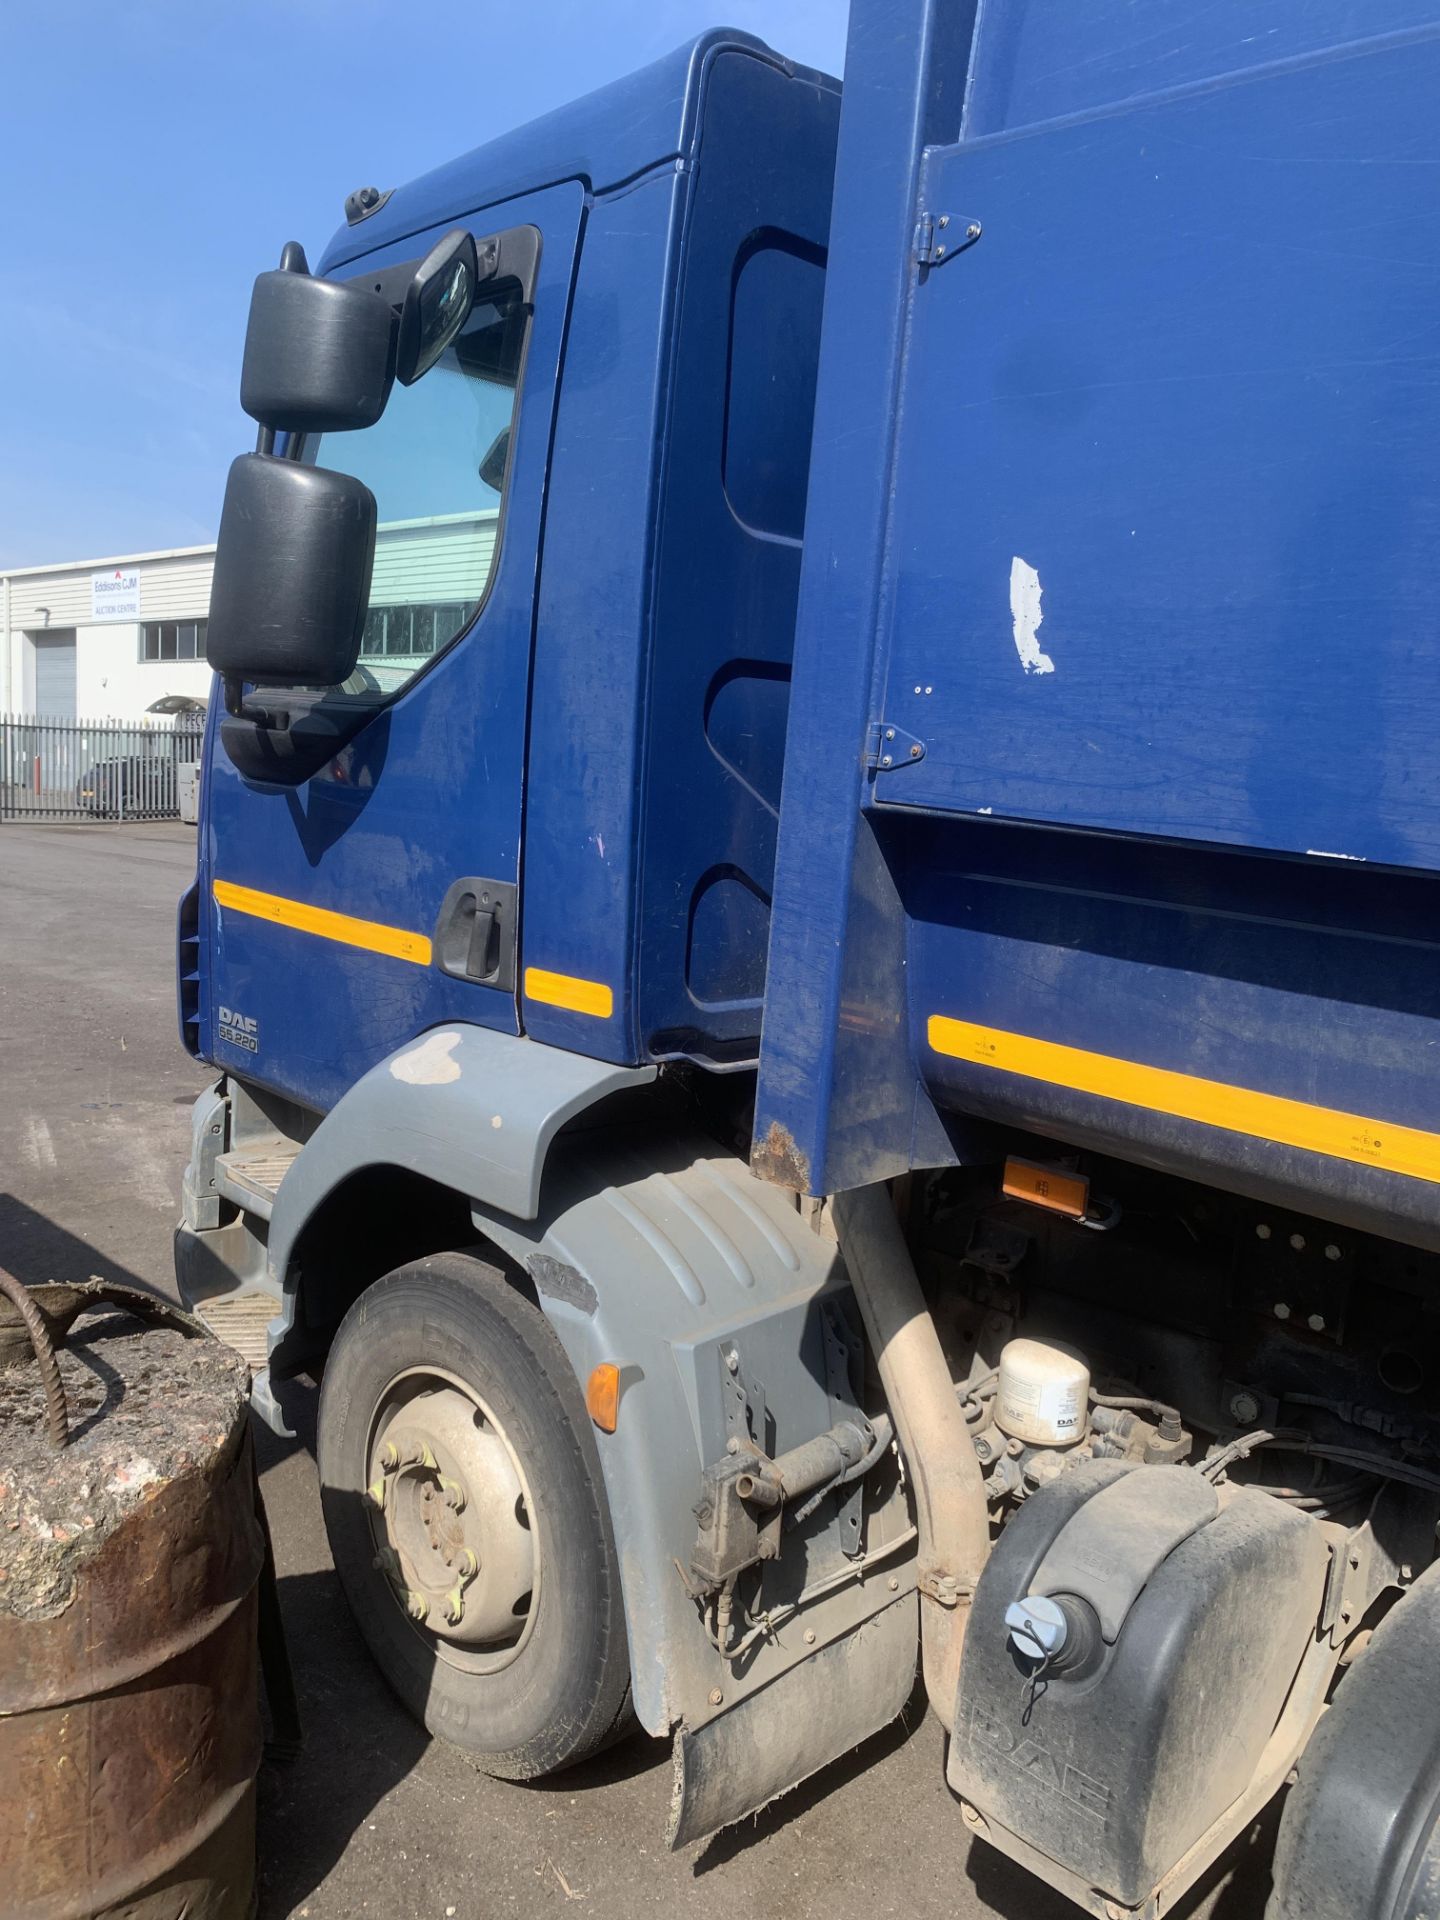 2013 BLUE DAF TRUCKS LF REFUSE COLLECTION VEHICLE - Image 9 of 12